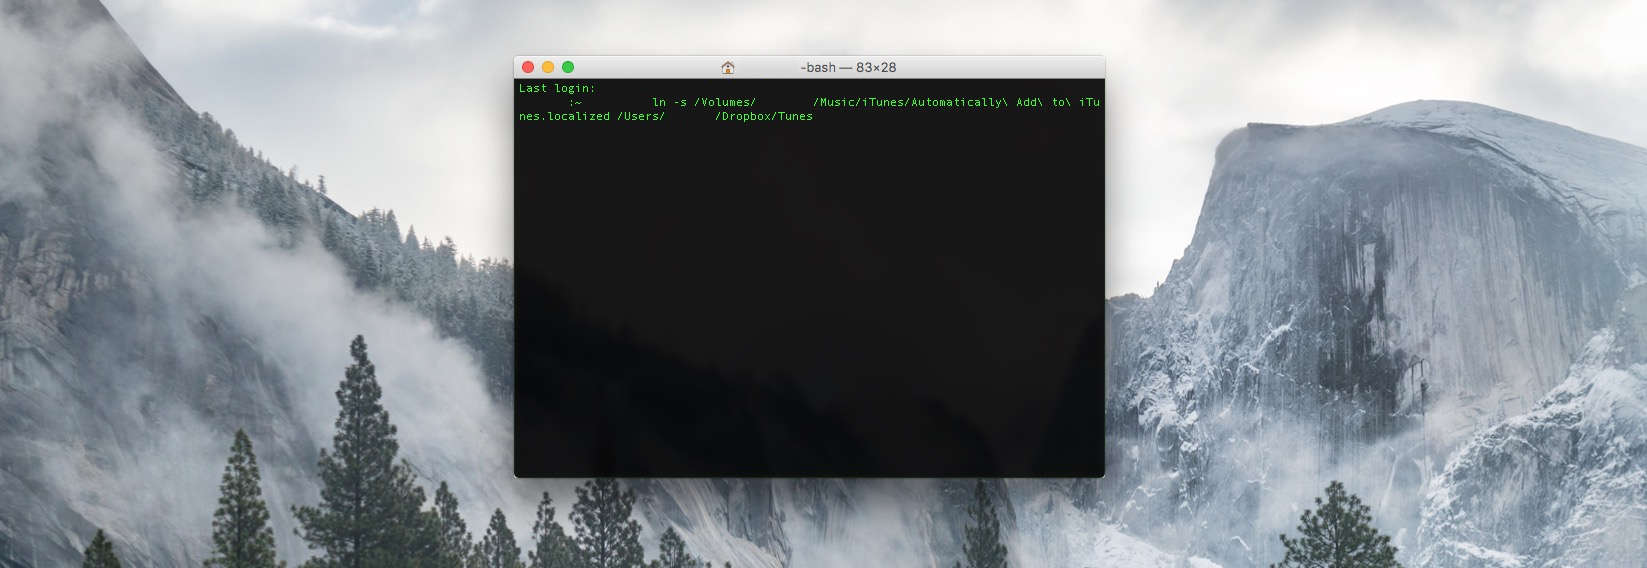 The Terminal may look badass, but for this tip it's easy to use.